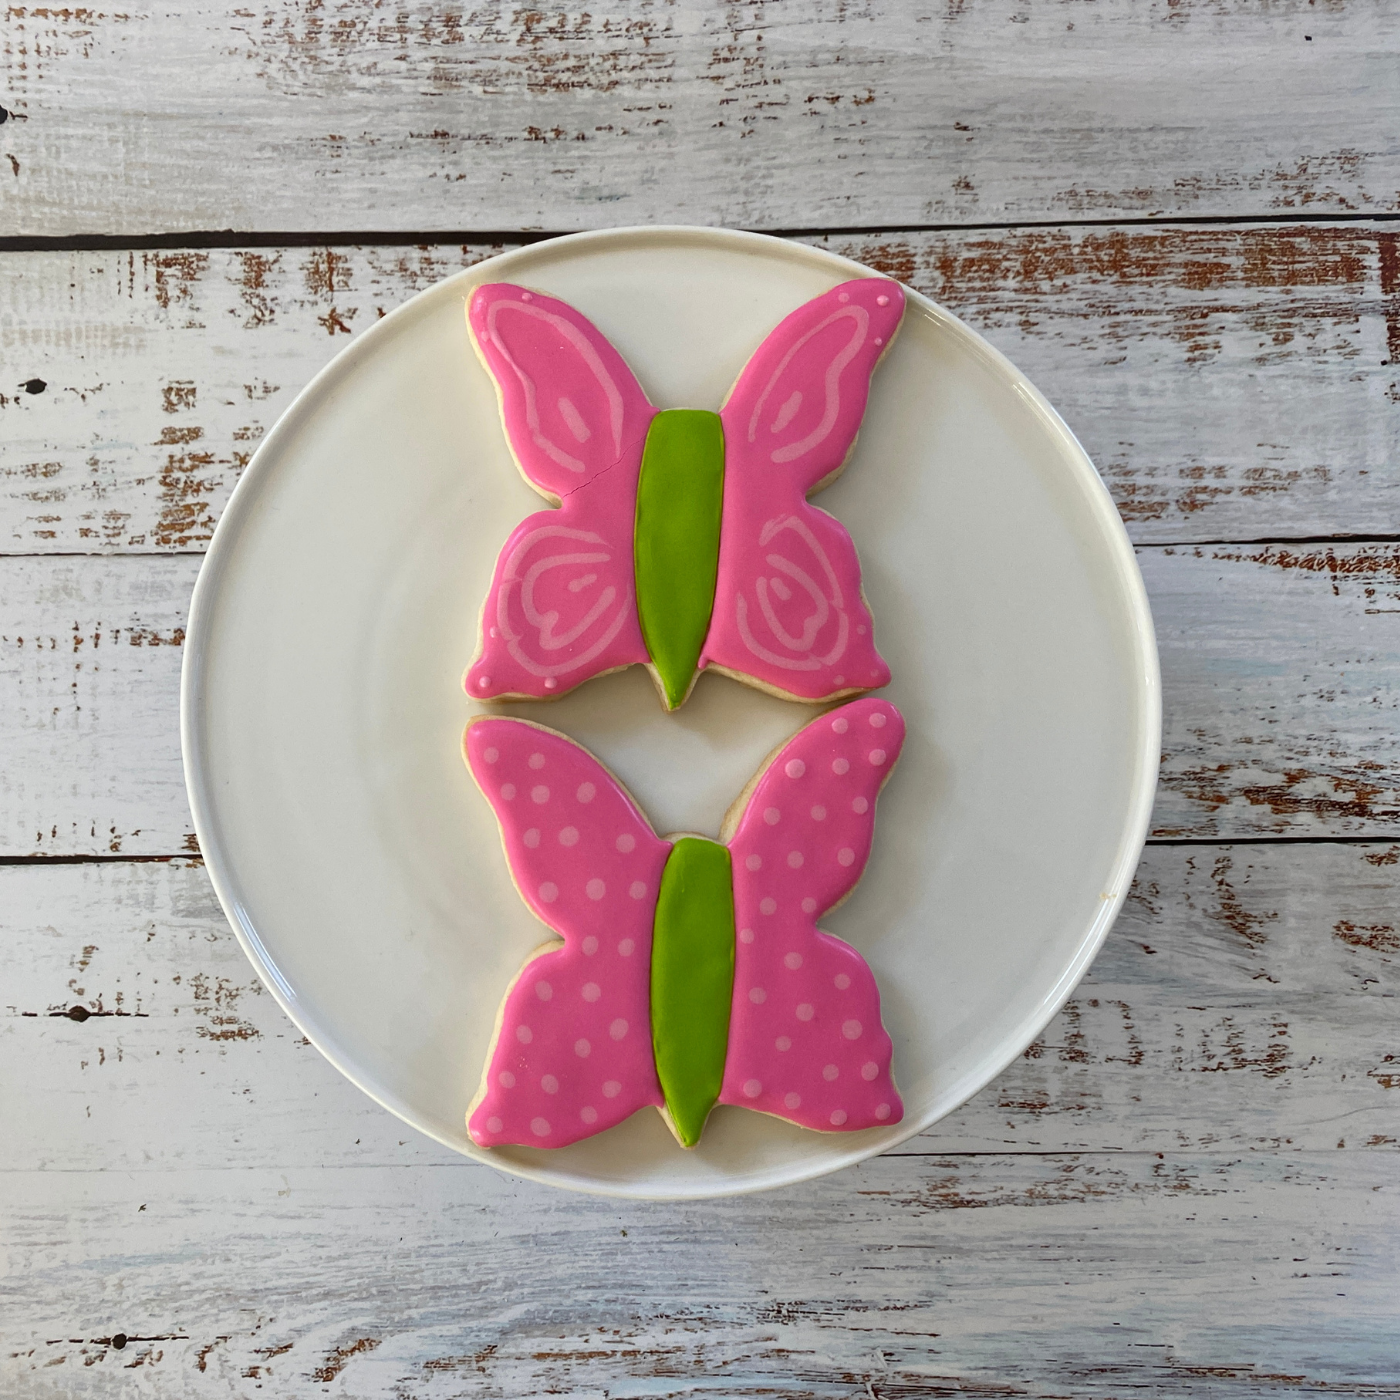 Lifestyle image of two decorated butterfly shaped cookies.